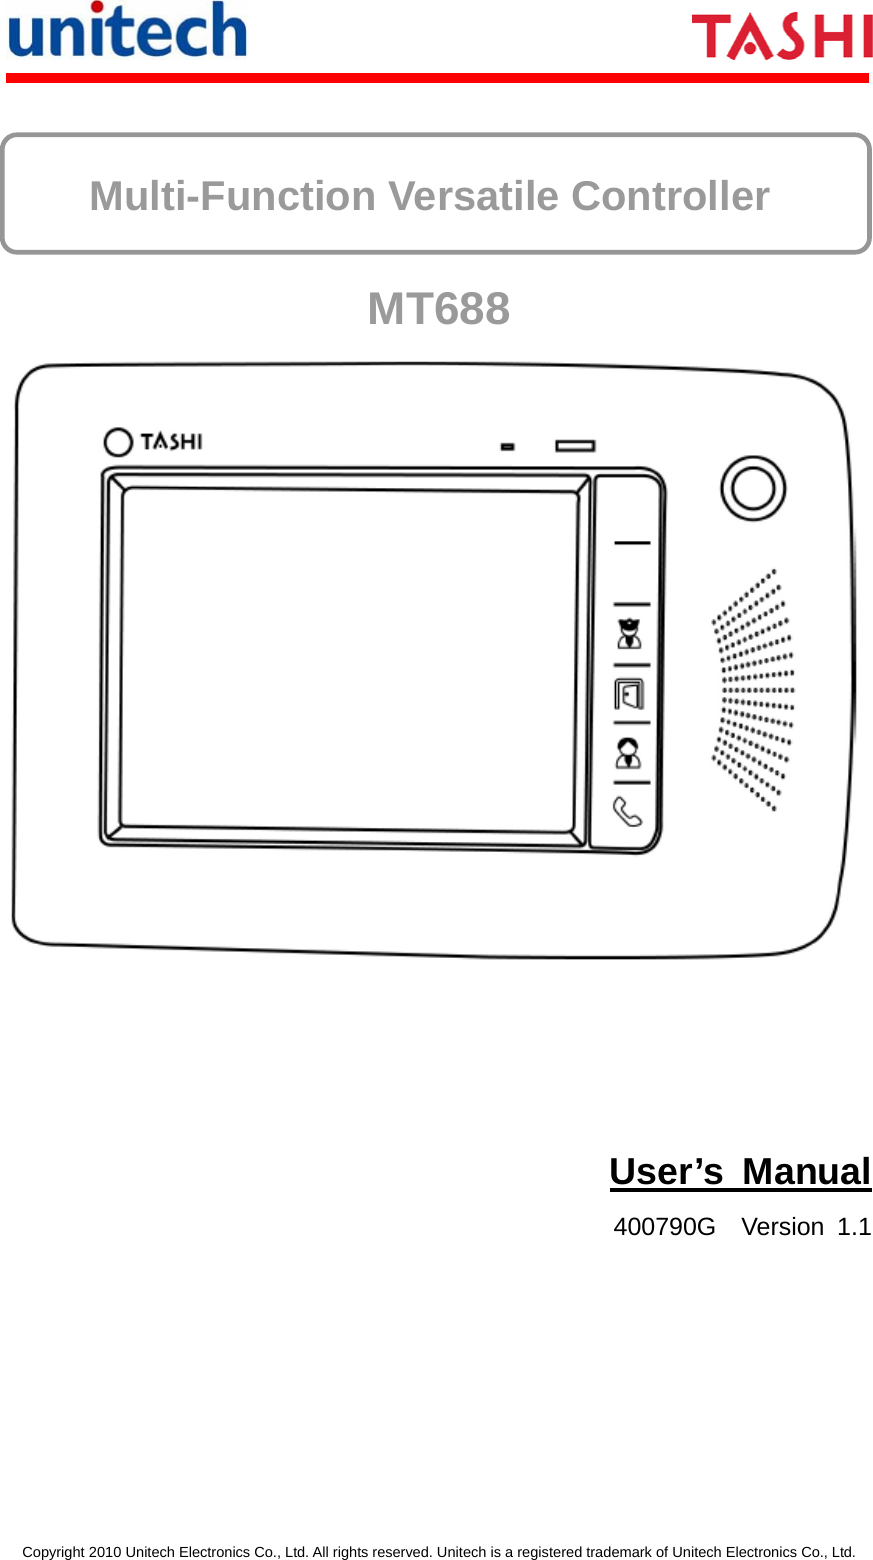       Copyright 2010 Unitech Electronics Co., Ltd. All rights reserved. Unitech is a registered trademark of Unitech Electronics Co., Ltd.      Multi-Function Versatile Controller MT688  User’s Manual 400790G  Version 1.1  